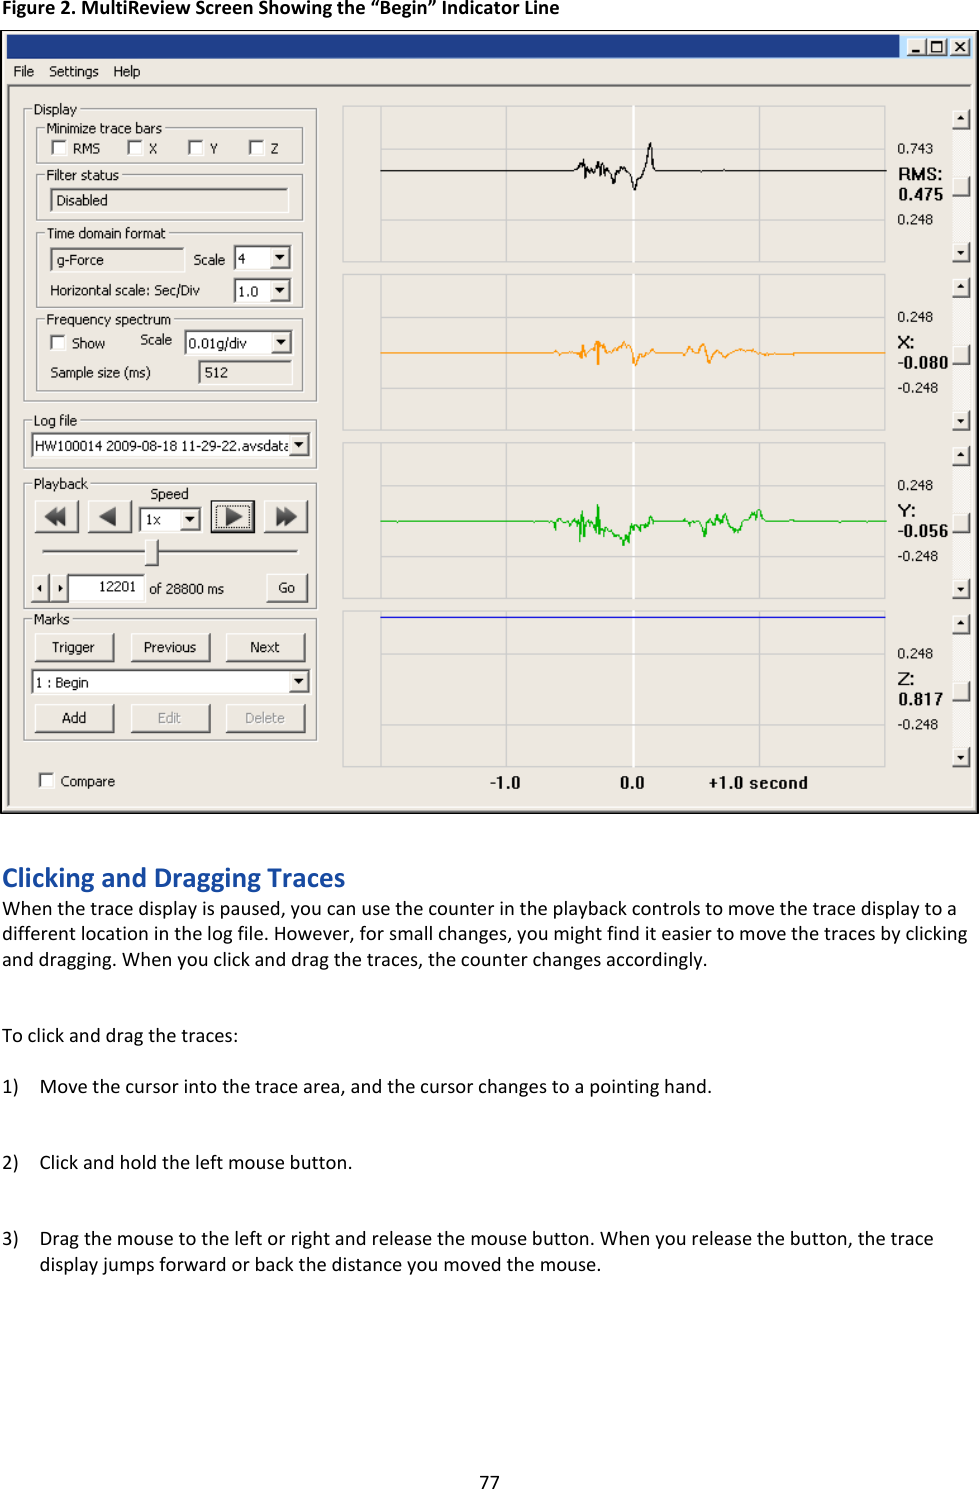   77 Figure 2. MultiReview Screen Showing the “Begin” Indicator Line                                  Clicking and Dragging Traces When the trace display is paused, you can use the counter in the playback controls to move the trace display to a different location in the log file. However, for small changes, you might find it easier to move the traces by clicking and dragging. When you click and drag the traces, the counter changes accordingly.   To click and drag the traces:  1) Move the cursor into the trace area, and the cursor changes to a pointing hand.   2) Click and hold the left mouse button.   3) Drag the mouse to the left or right and release the mouse button. When you release the button, the trace display jumps forward or back the distance you moved the mouse.       Indicator line 